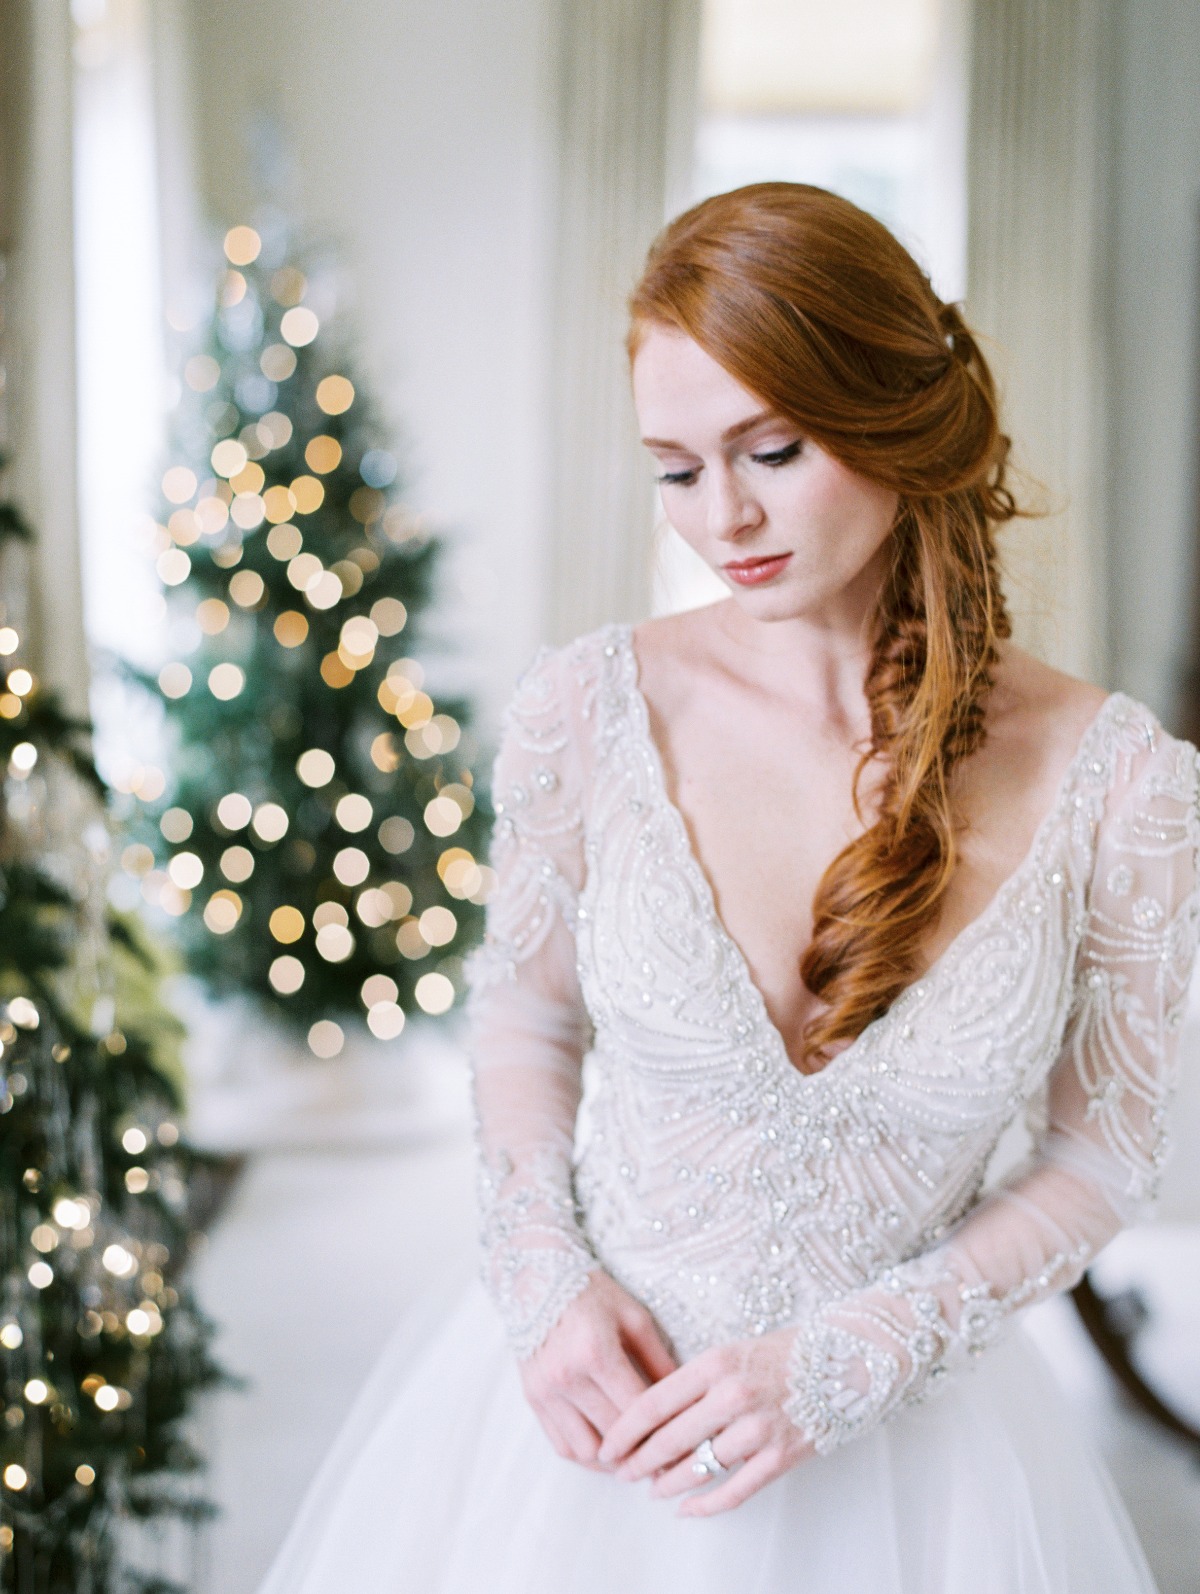 A romantic embellished wedding ballgown with a deep V neckline, long sleeves and a plain full skirt is a beautiful idea